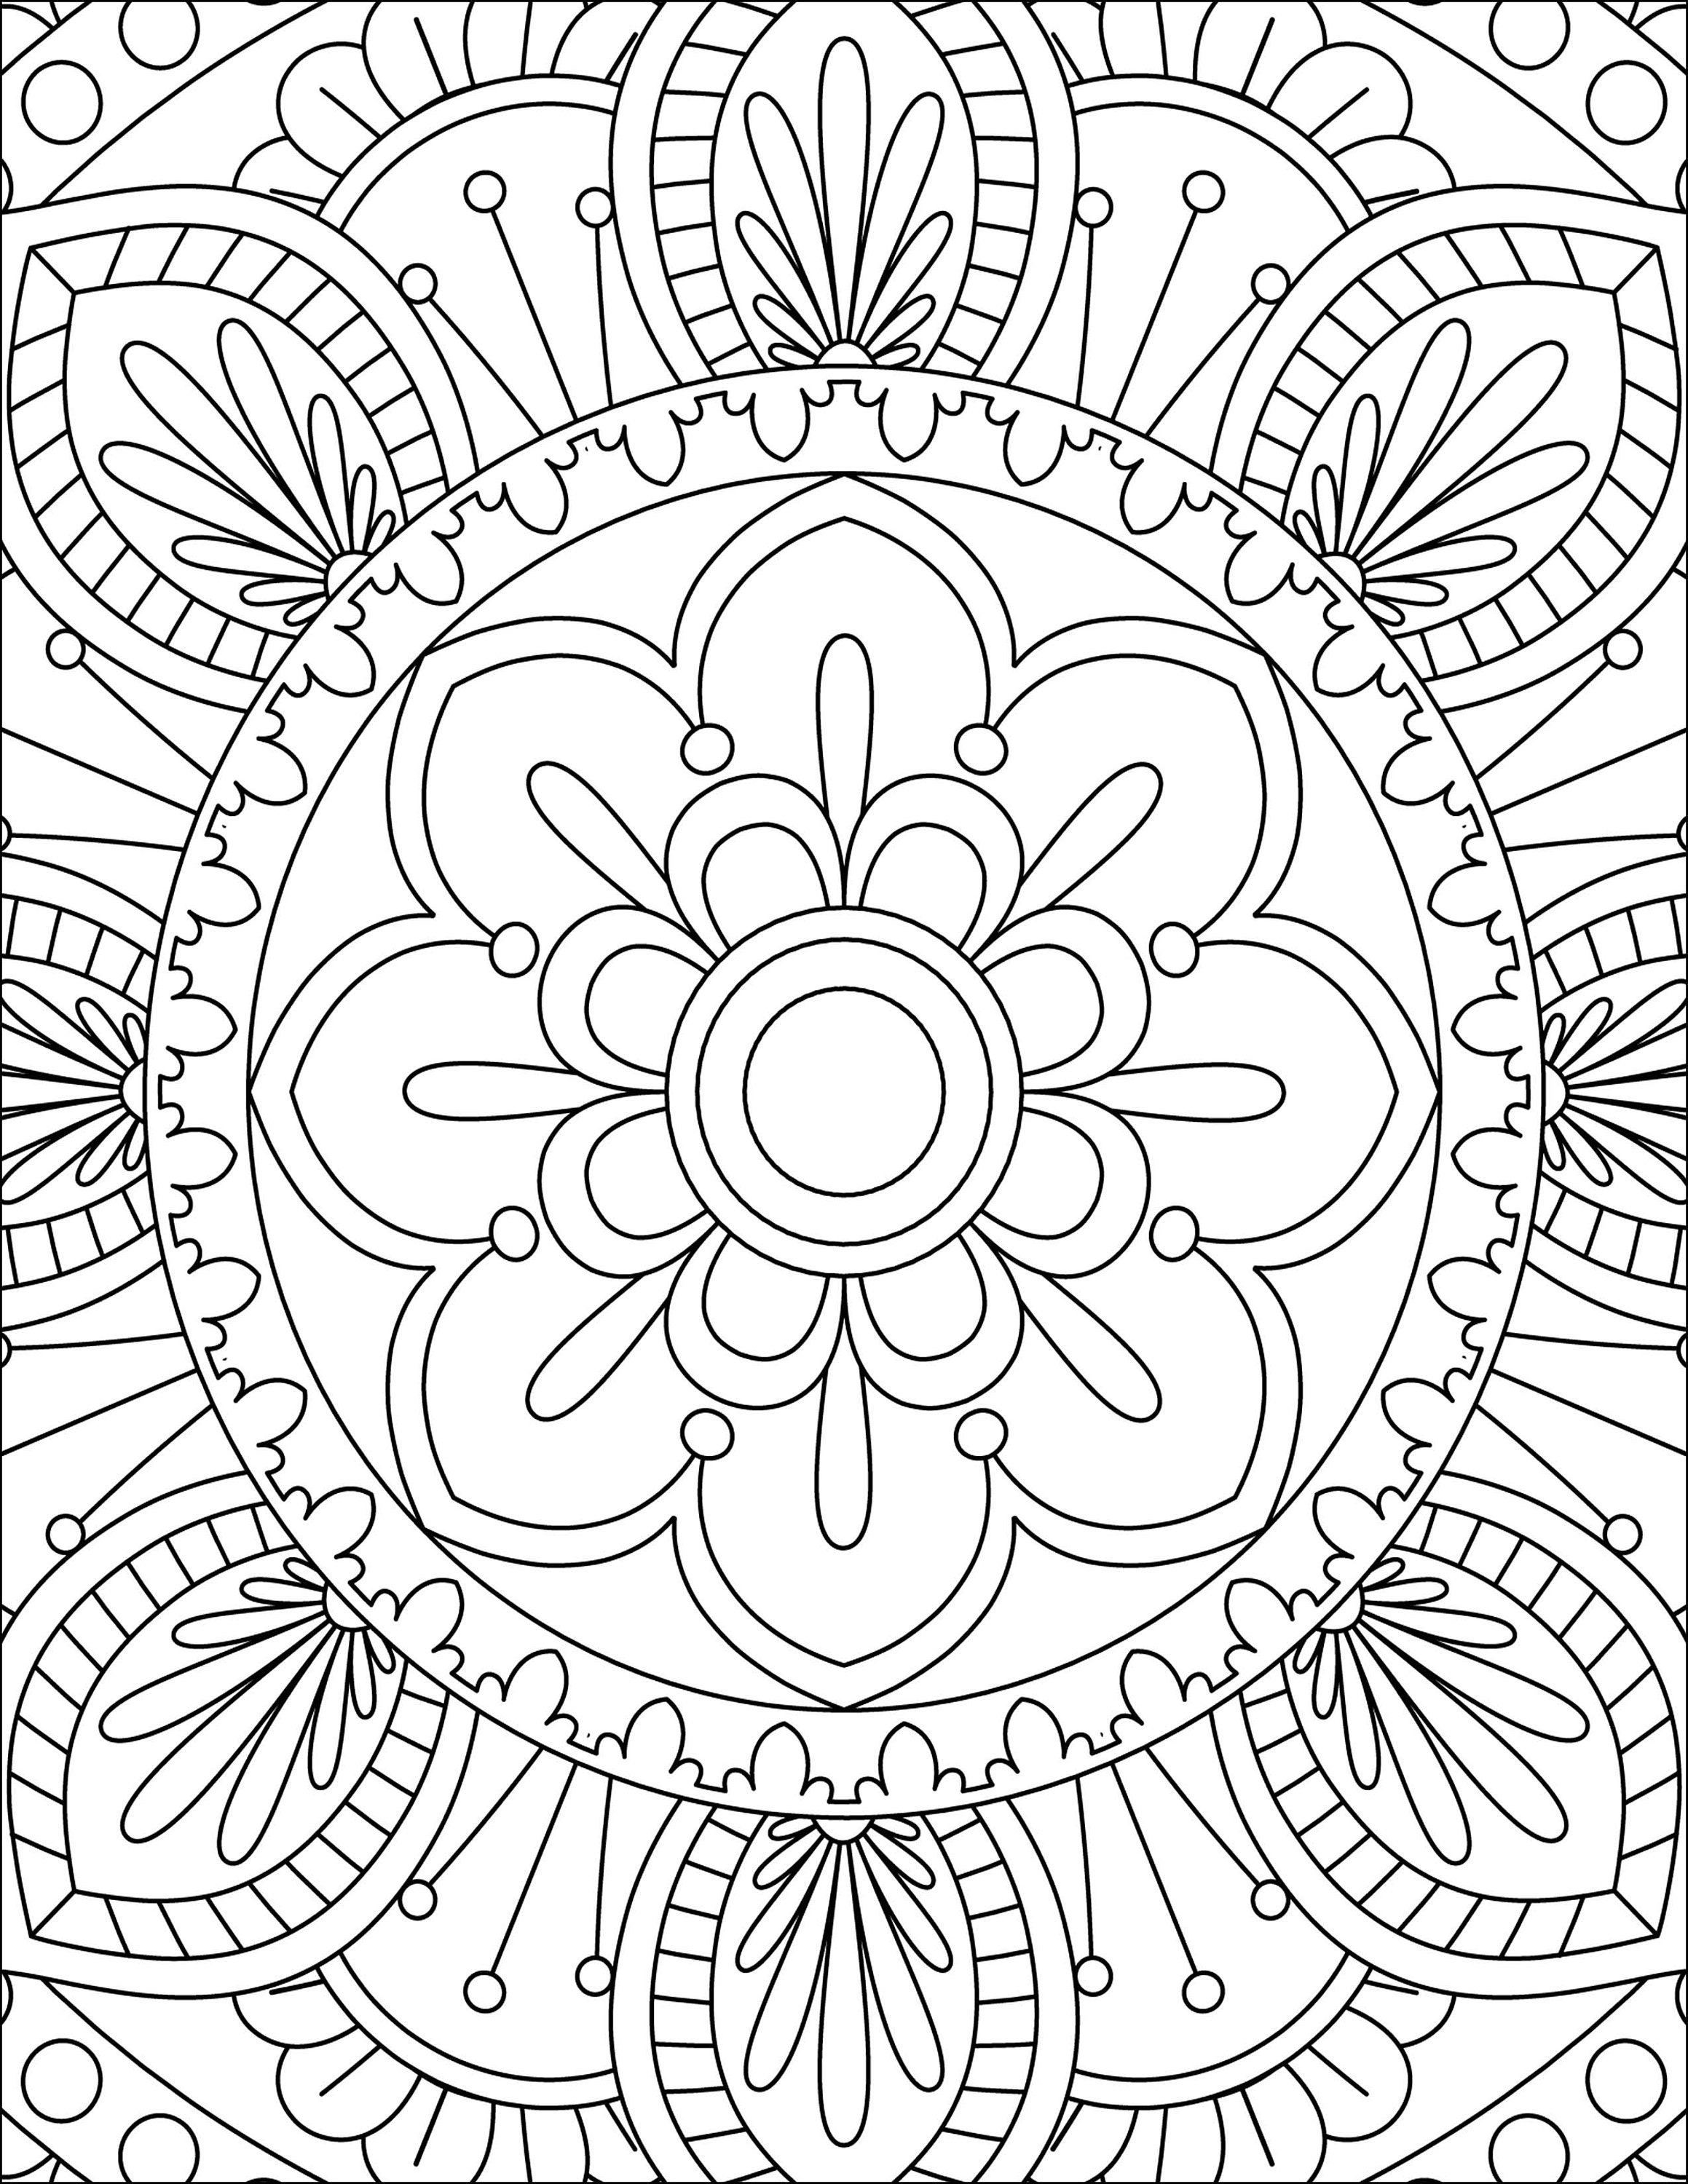 Beautiful and Fun Mandela Coloring Pages for all Ages | Etsy